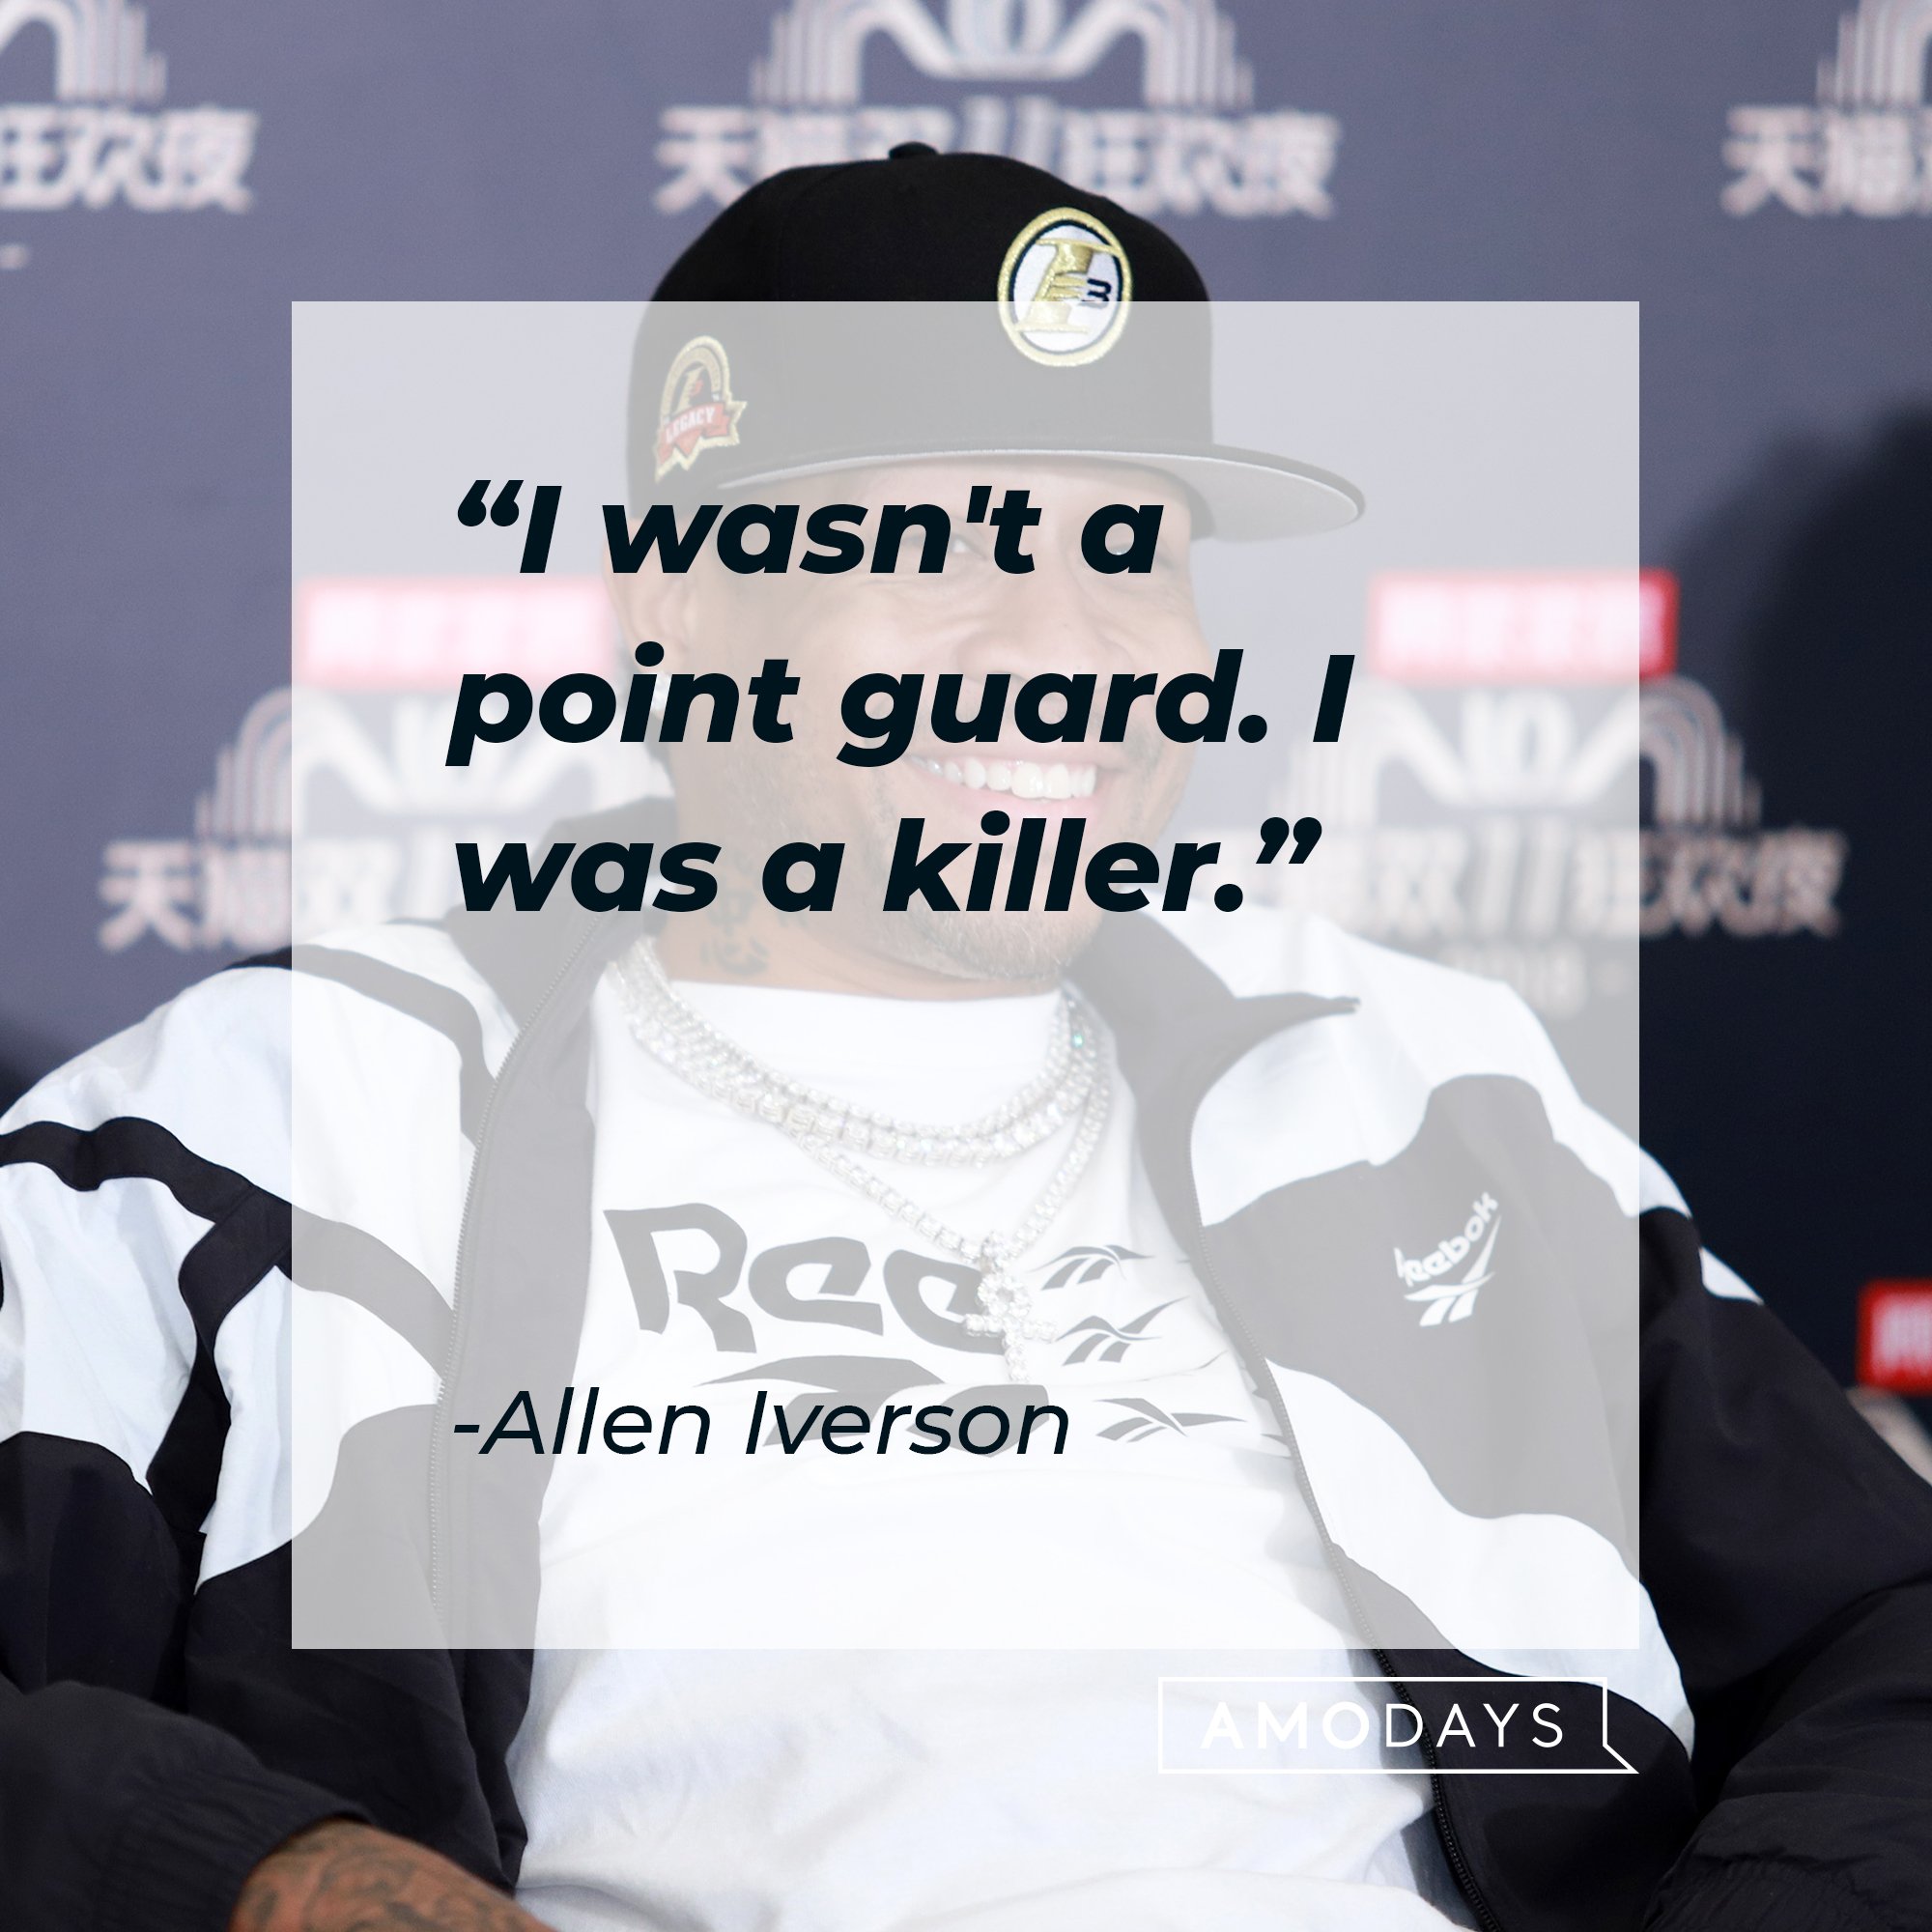 Allen Iverson's quote: "I wasn't a point guard. I was a killer.” | Image: AmoDays